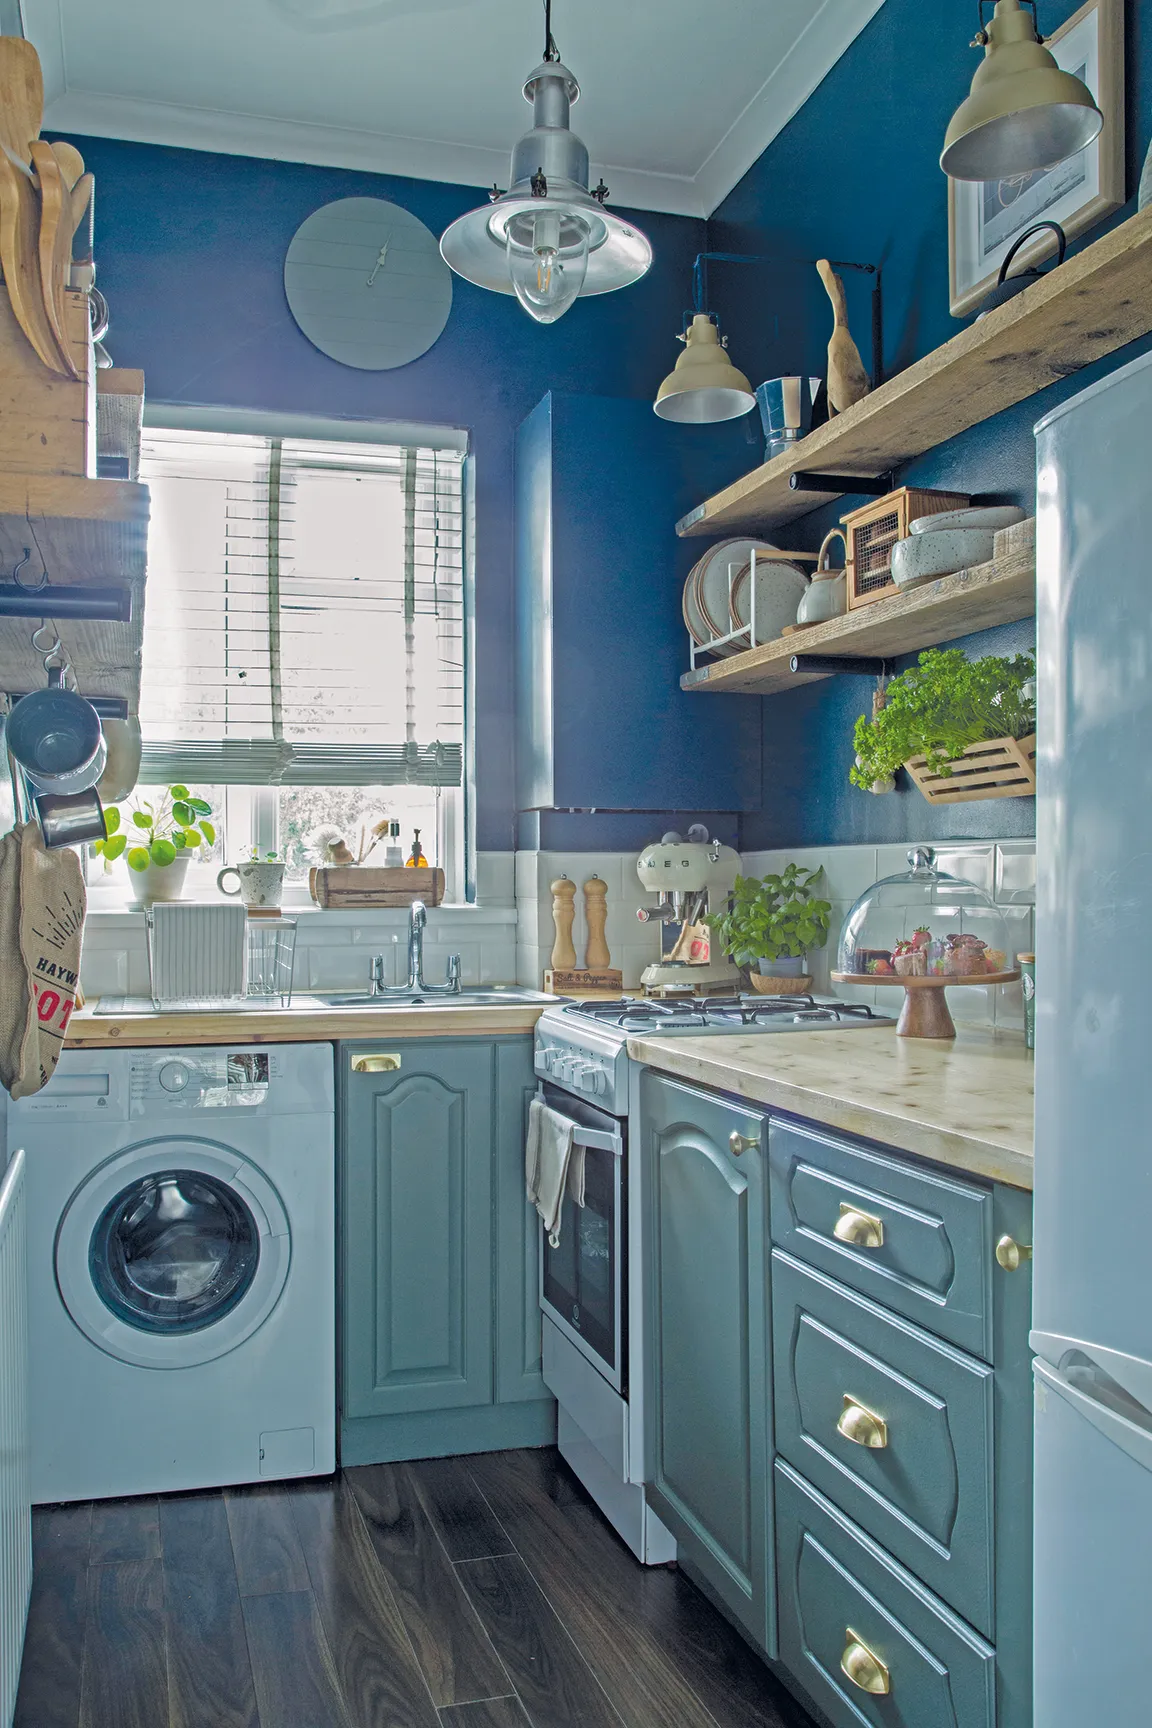 Together, the teal, navy and raw wood tones create a kitchen scheme that feels classic, yet contemporary, as well as rustic and relaxed